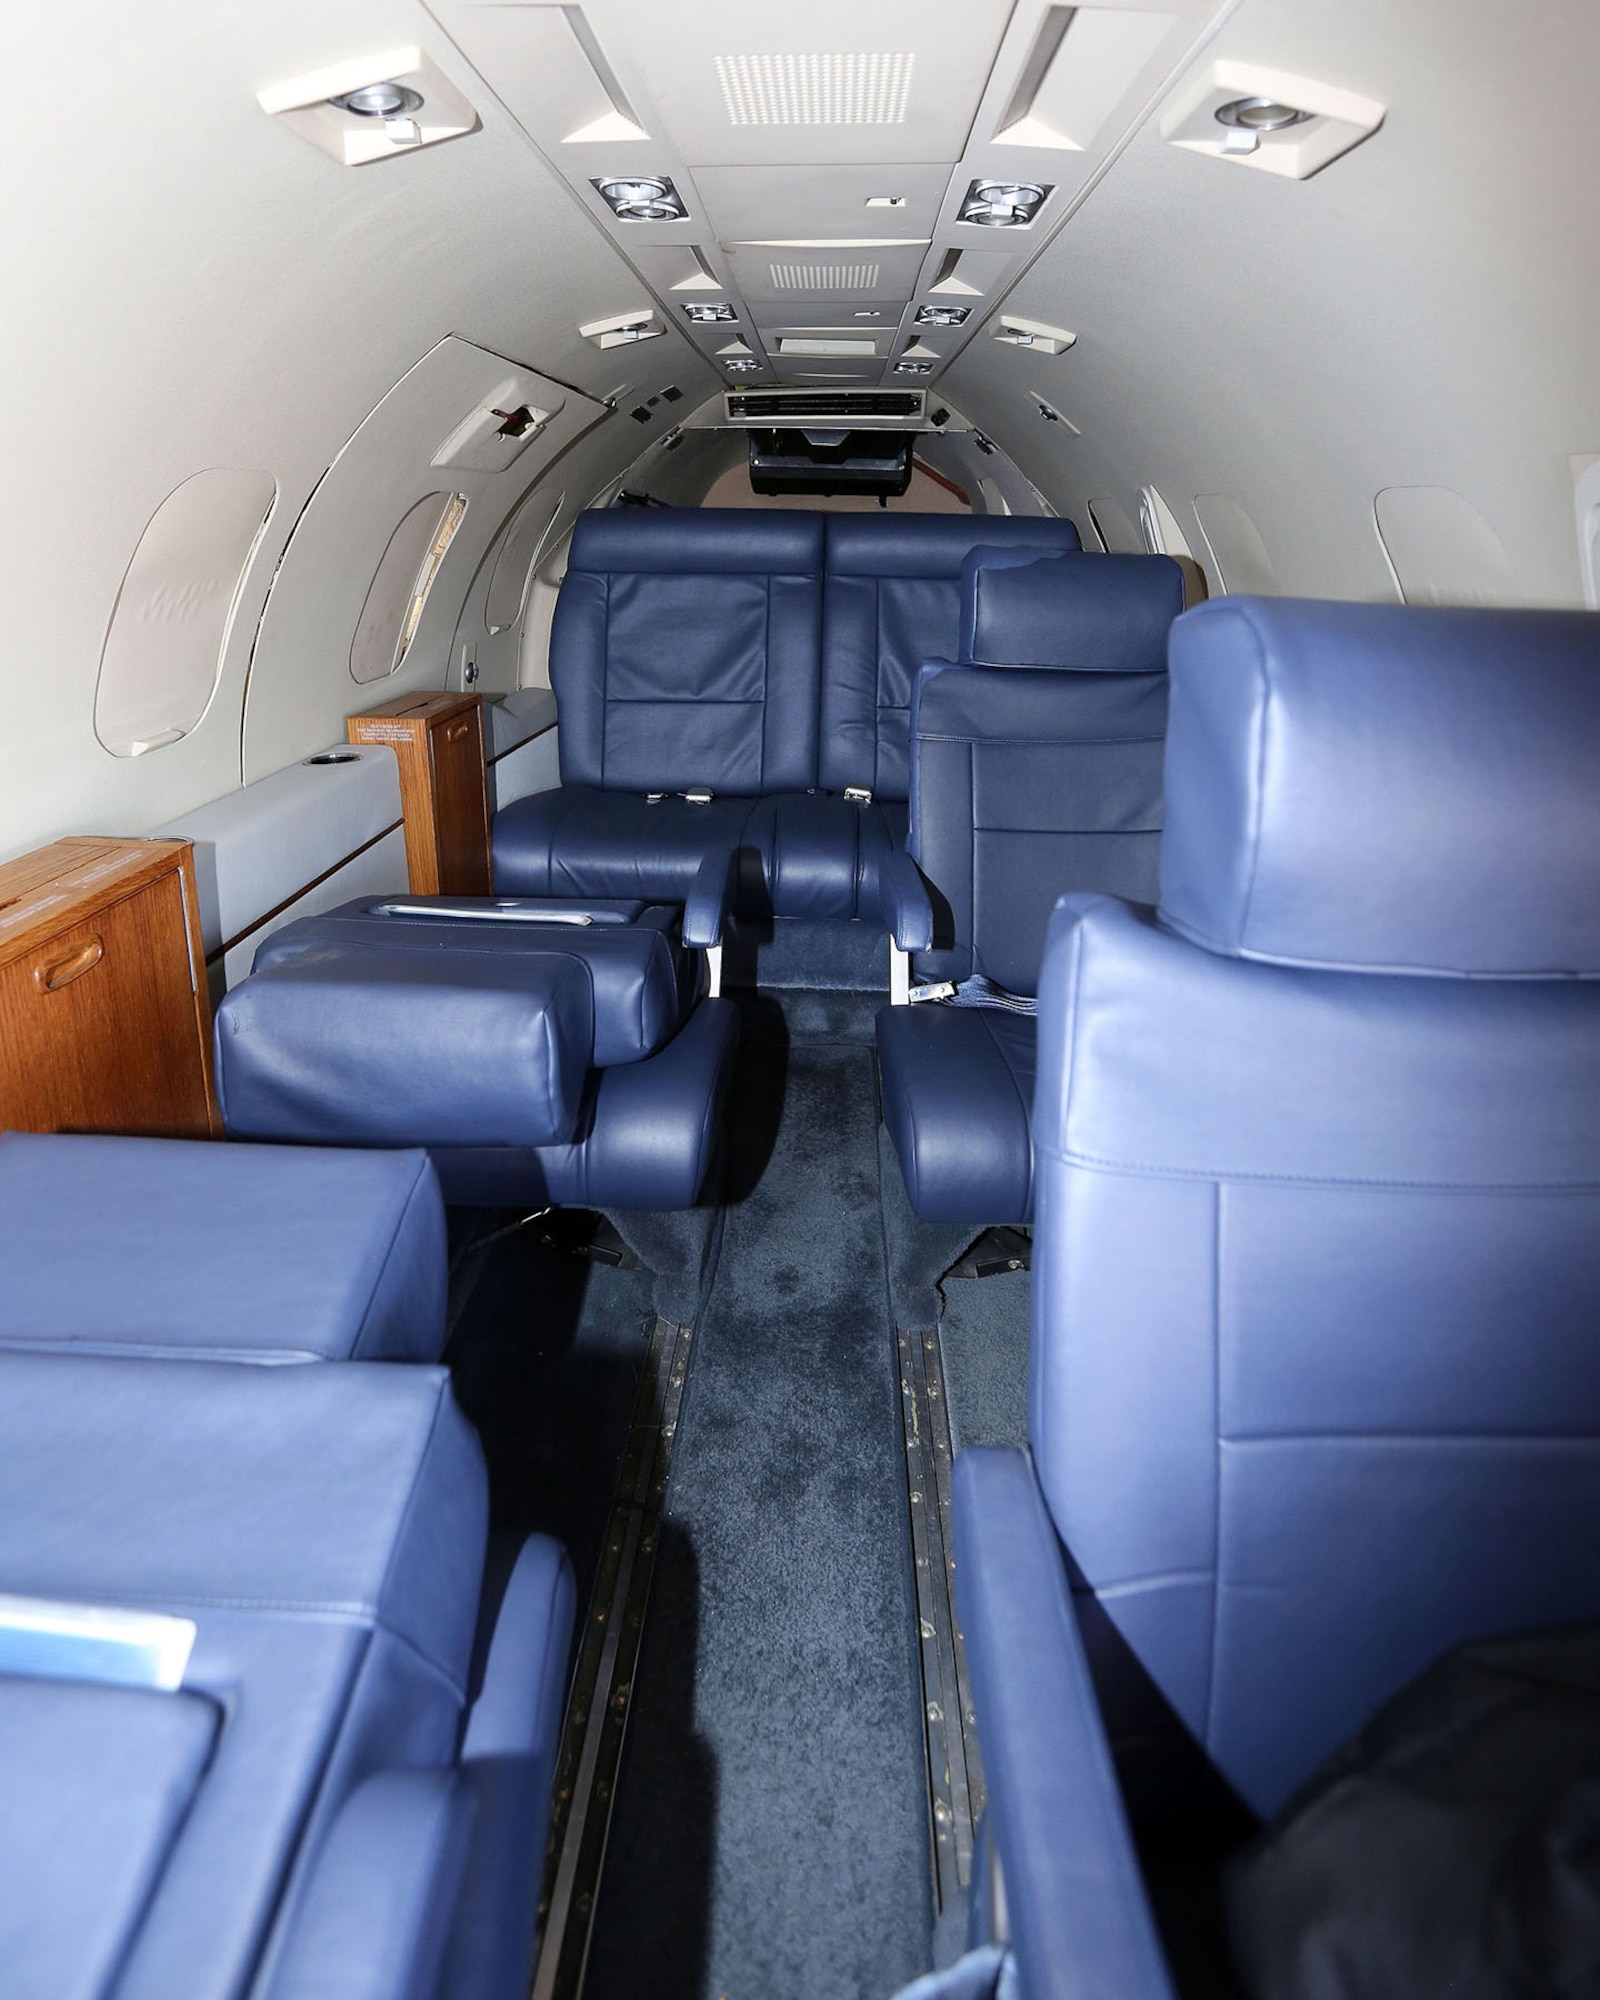 DAYTON, Ohio -- Learjet C-21A interior at the National Museum of the U.S. Air Force. (U.S. Air Force photo by Don Popp)